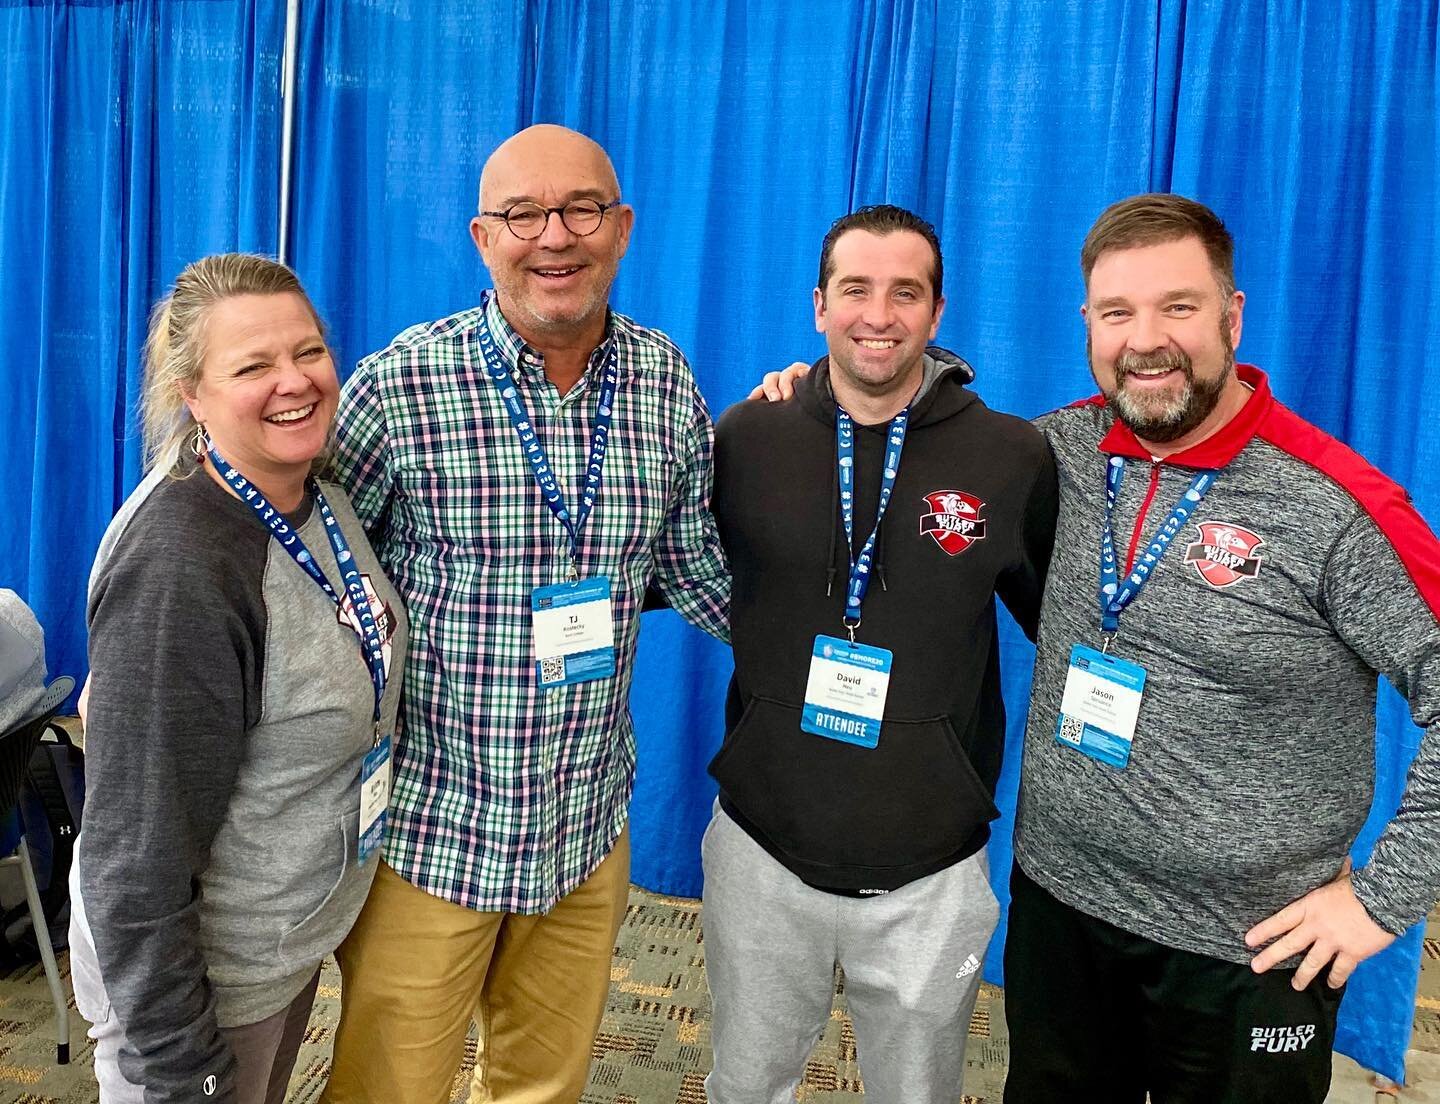 It was great getting to catch up with TJ Kostecky at the National coaches convention.  Thanks TJ for the mentoring and vision training, and good luck in the coming years as you work to build Bards soccer program up. #bmore